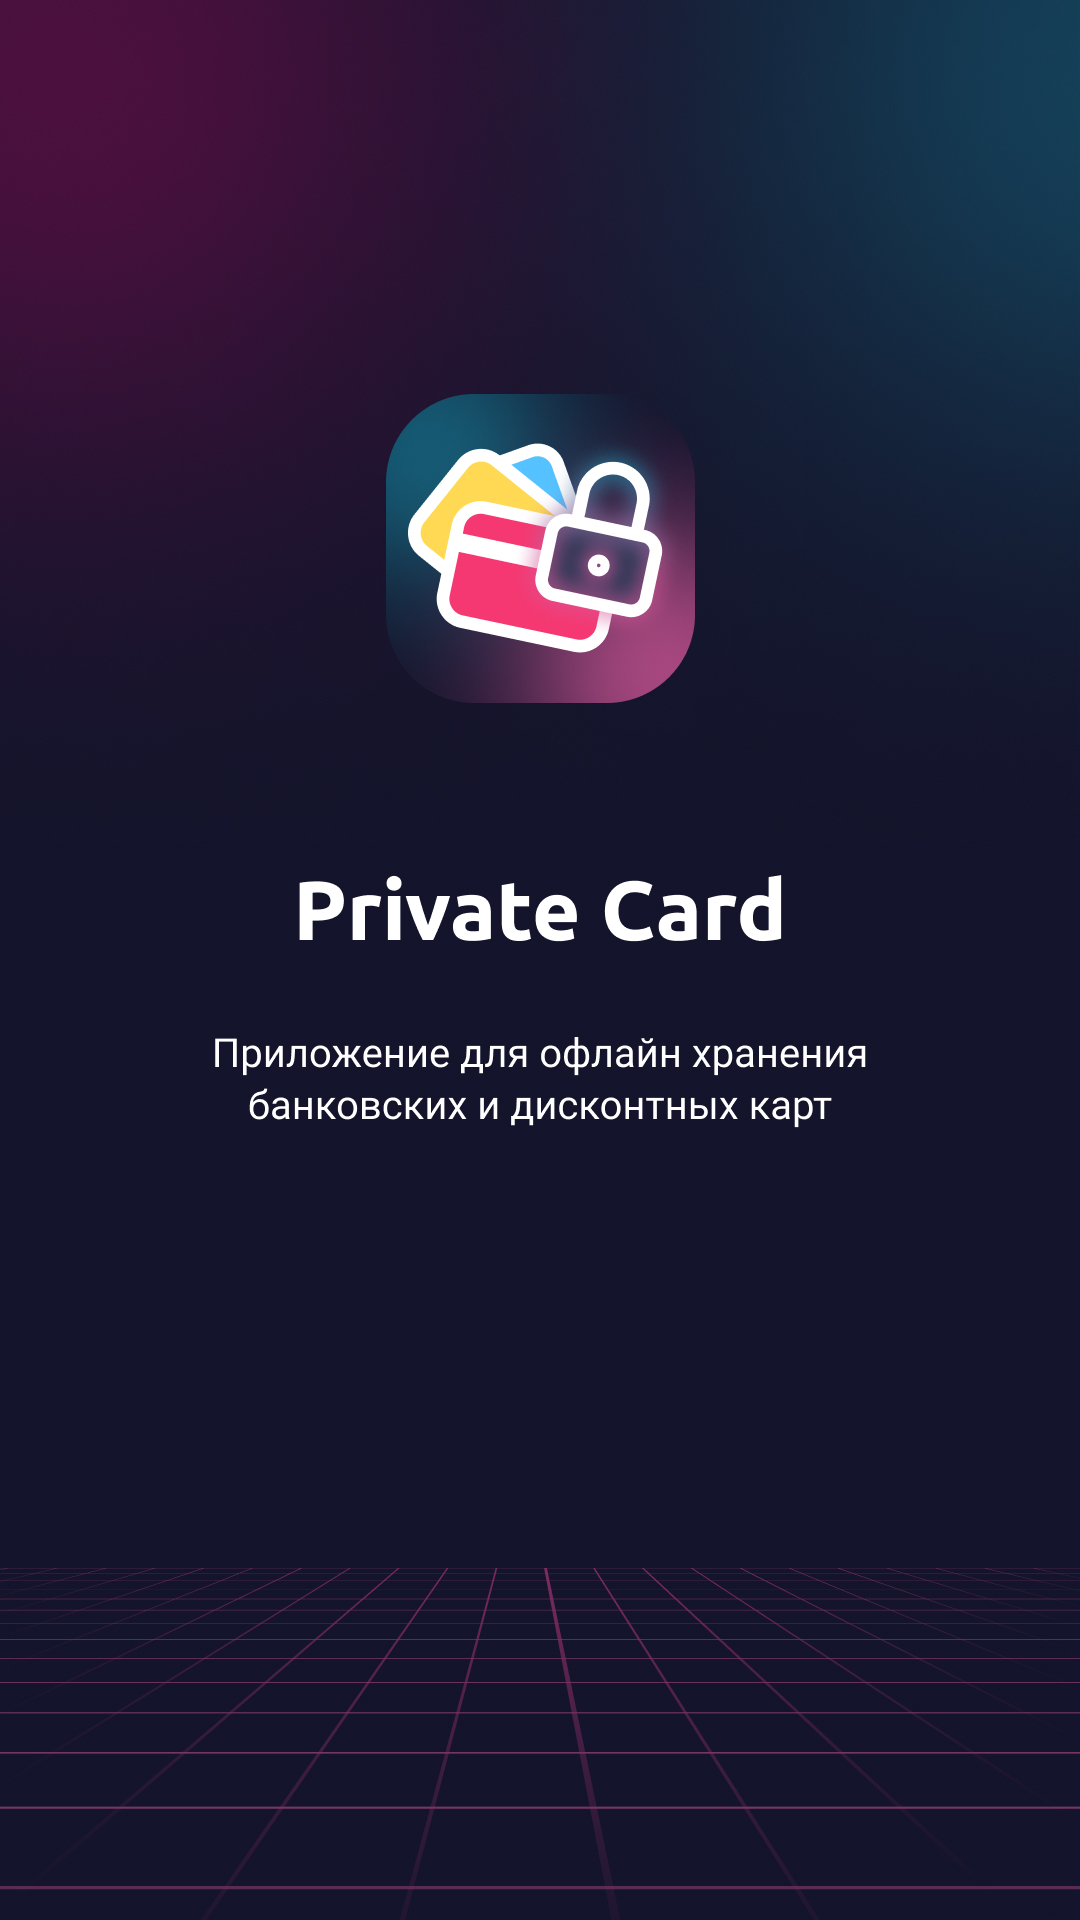 Card storage app - My, Android app, Android, Longpost